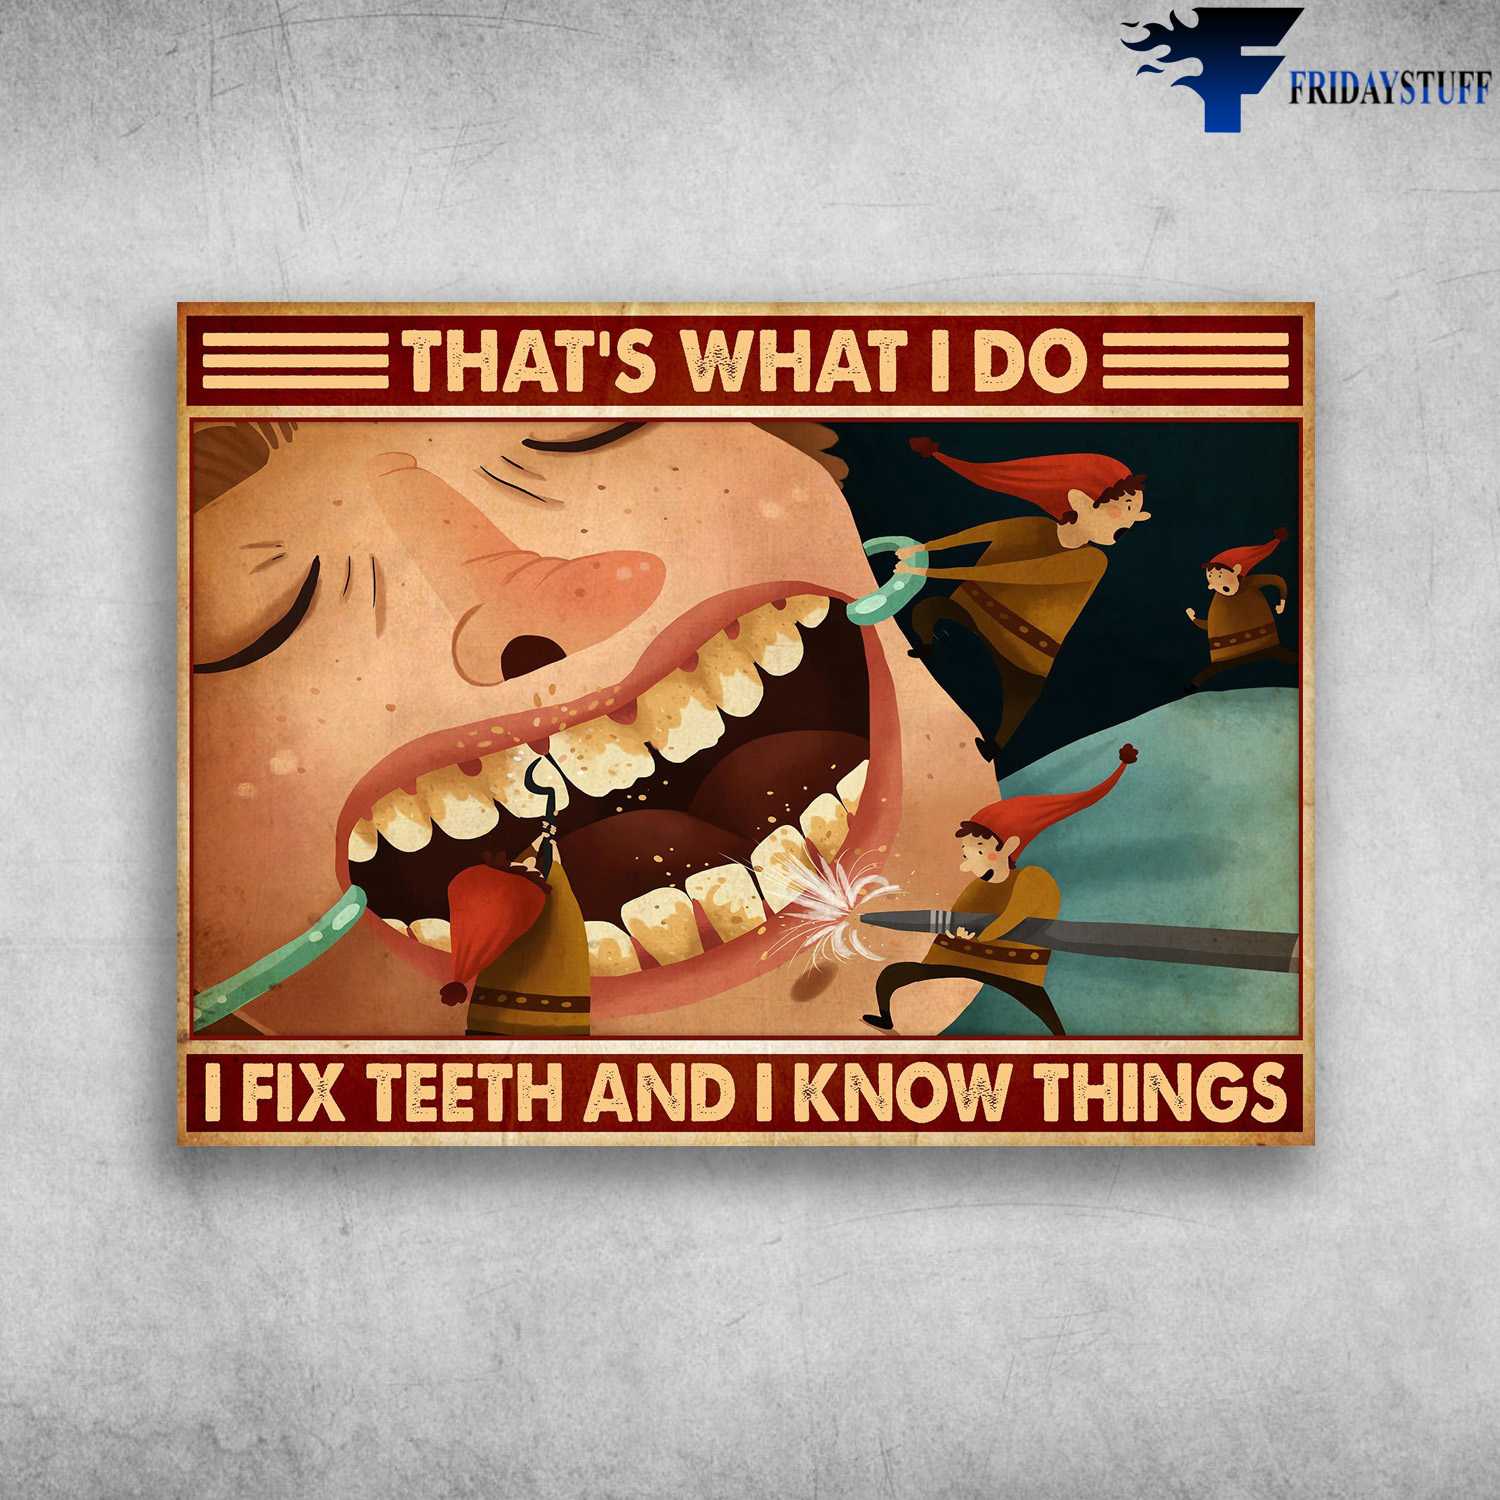 Brush Your Teeth - That's What I Do, I Fox Teeth, And I Know Things